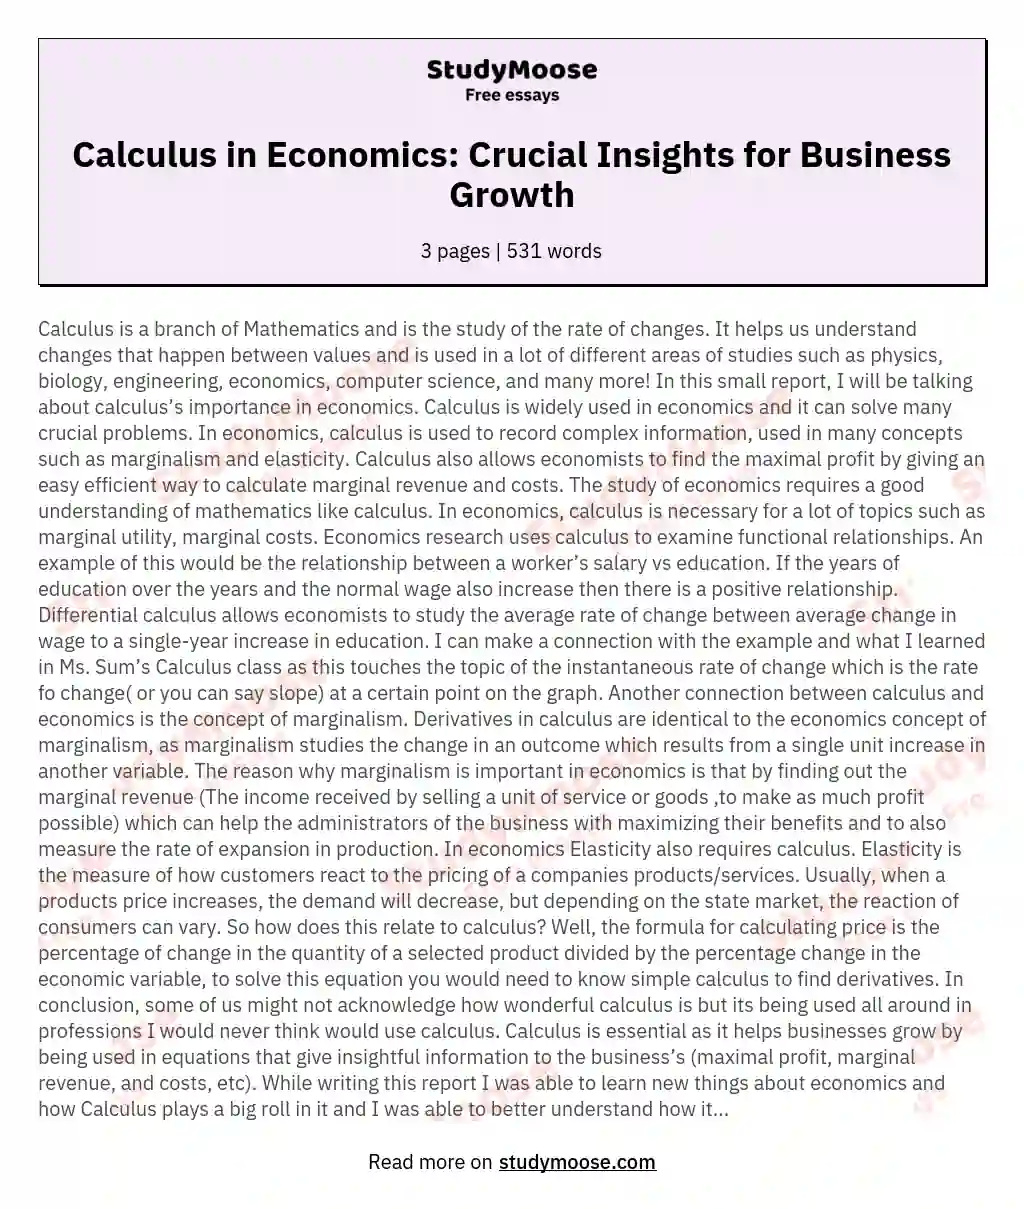 Calculus in Economics: Crucial Insights for Business Growth essay